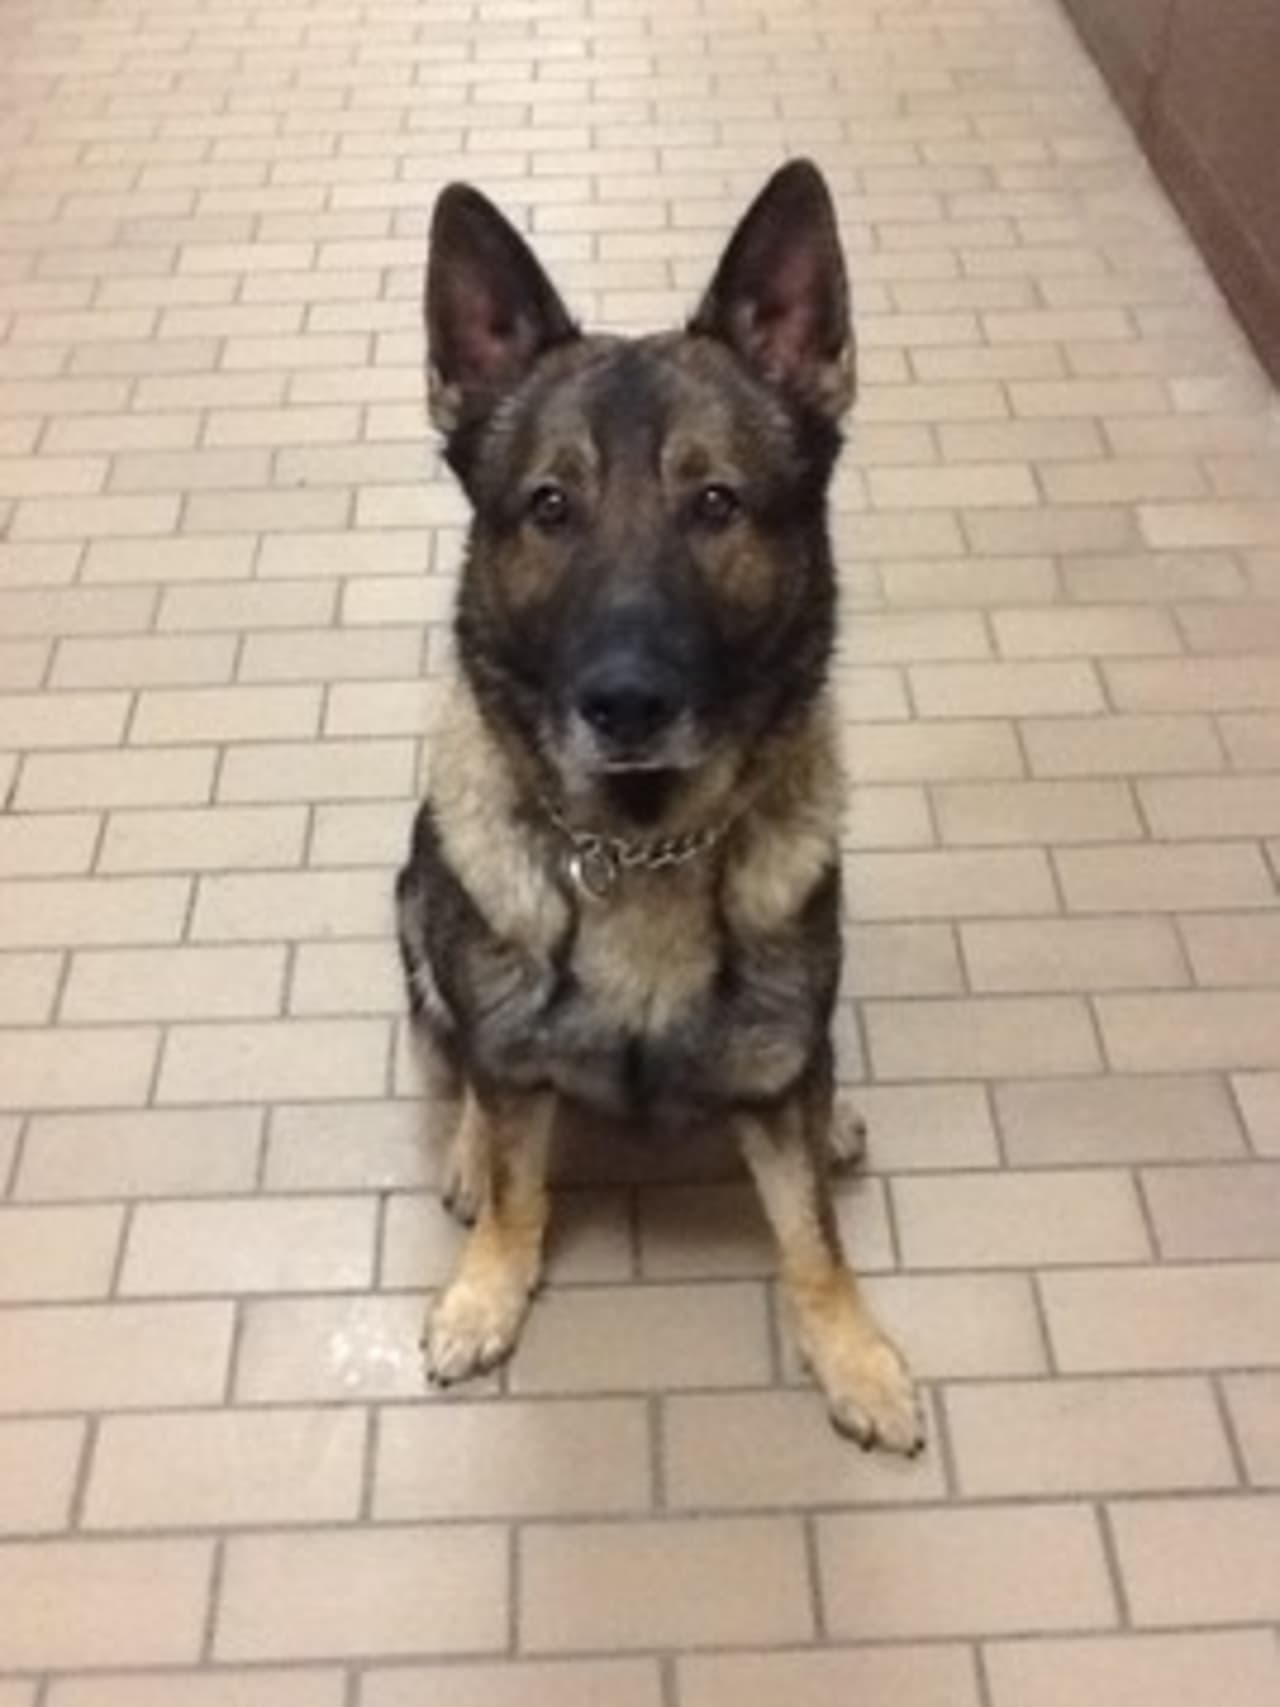 Affordable Mattress, a store that opened in February in Norwalk, will host a barbecue Saturday to kick off its fundraising effort to support the New Canaan K-9 Fund. Rocky (above), a K-9 on the New Canaan force, died in April in a training accident.